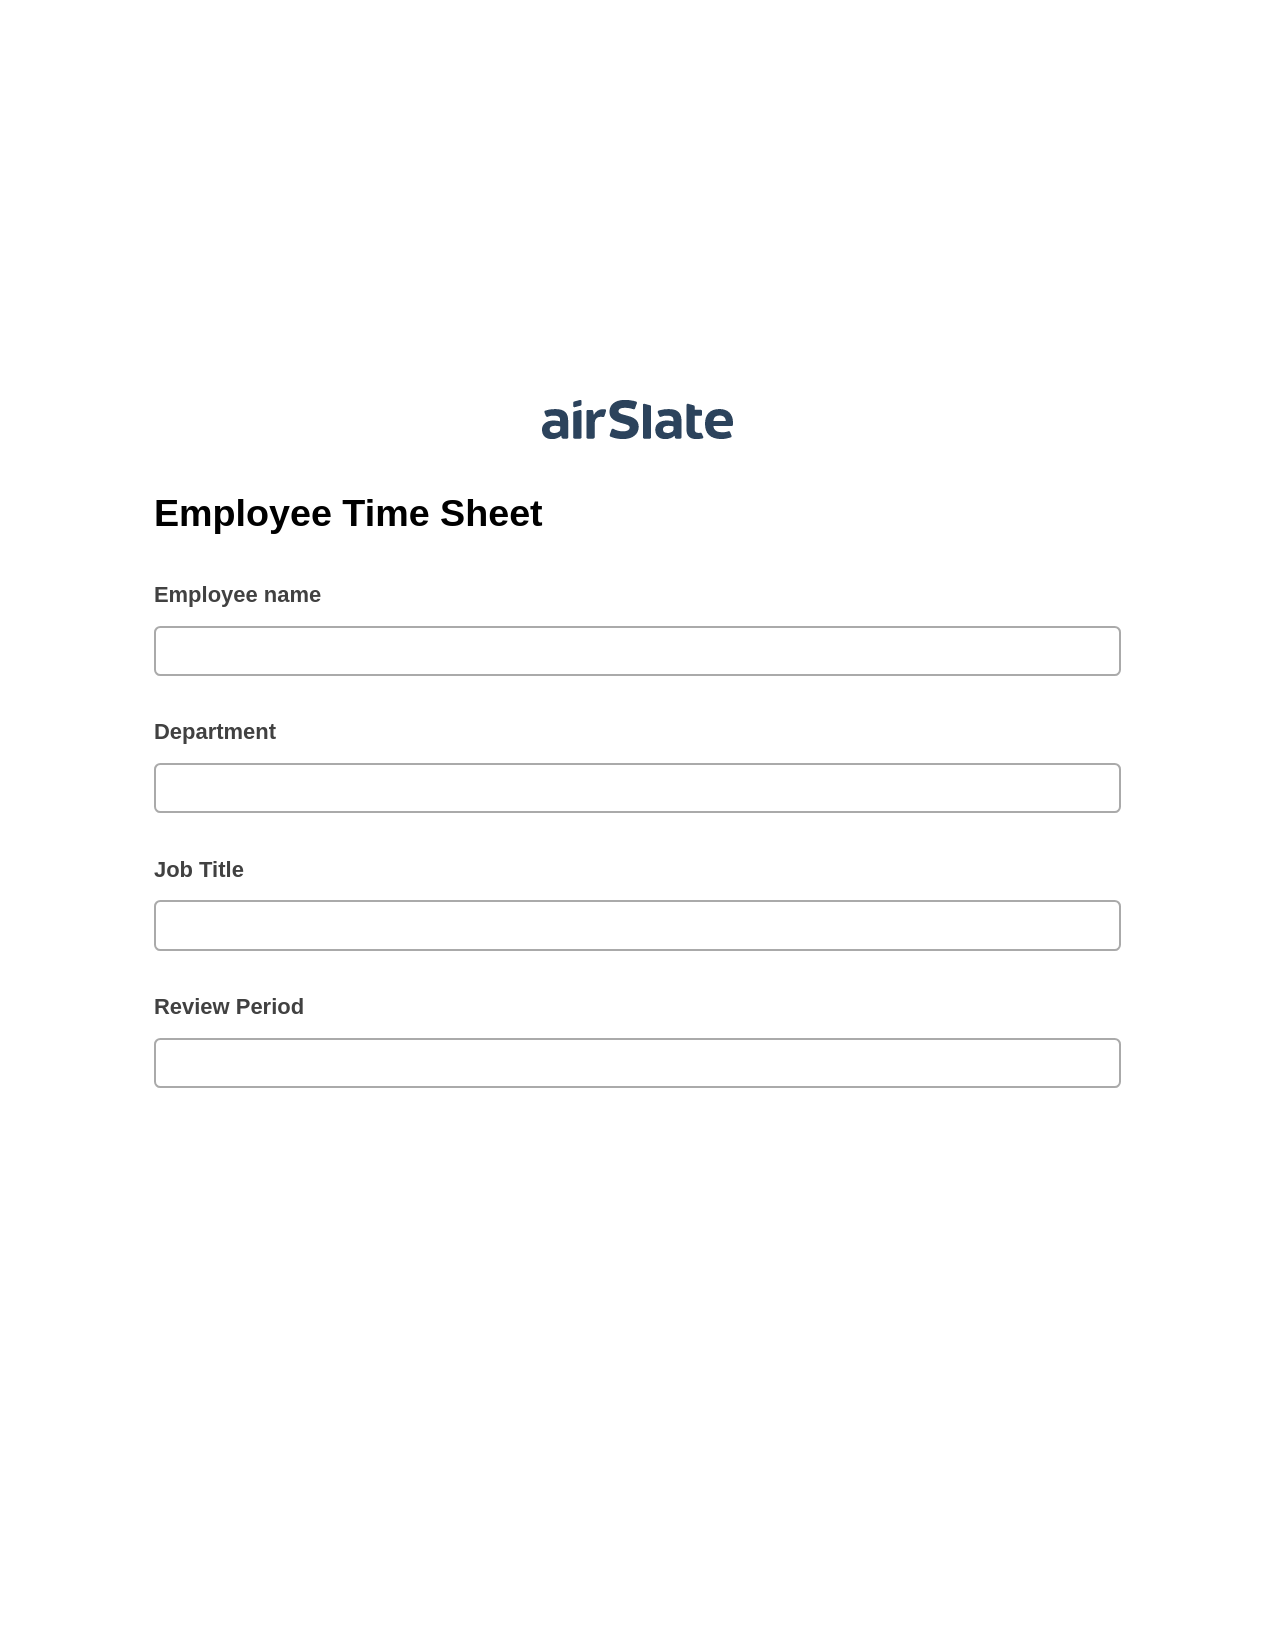 Multirole Employee Time Sheet Pre-fill Dropdowns from Google Sheet Bot, Update Salesforce Records Bot, Archive to Google Drive Bot